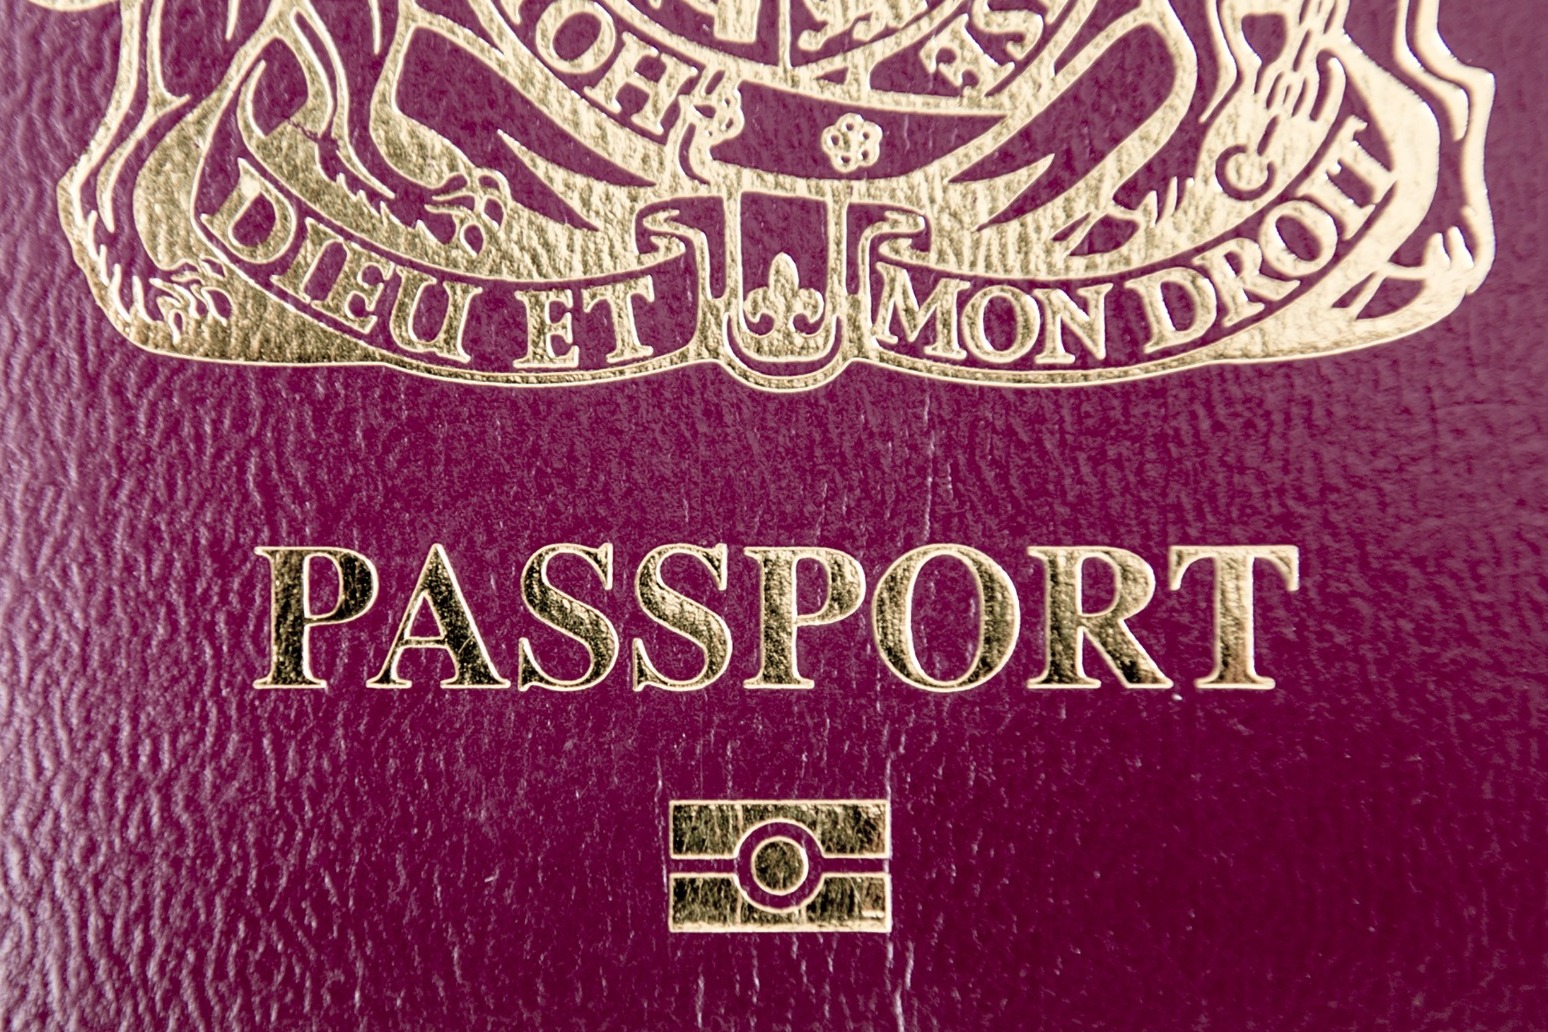 Fans with football banning orders must hand over passports ahead of World Cup 